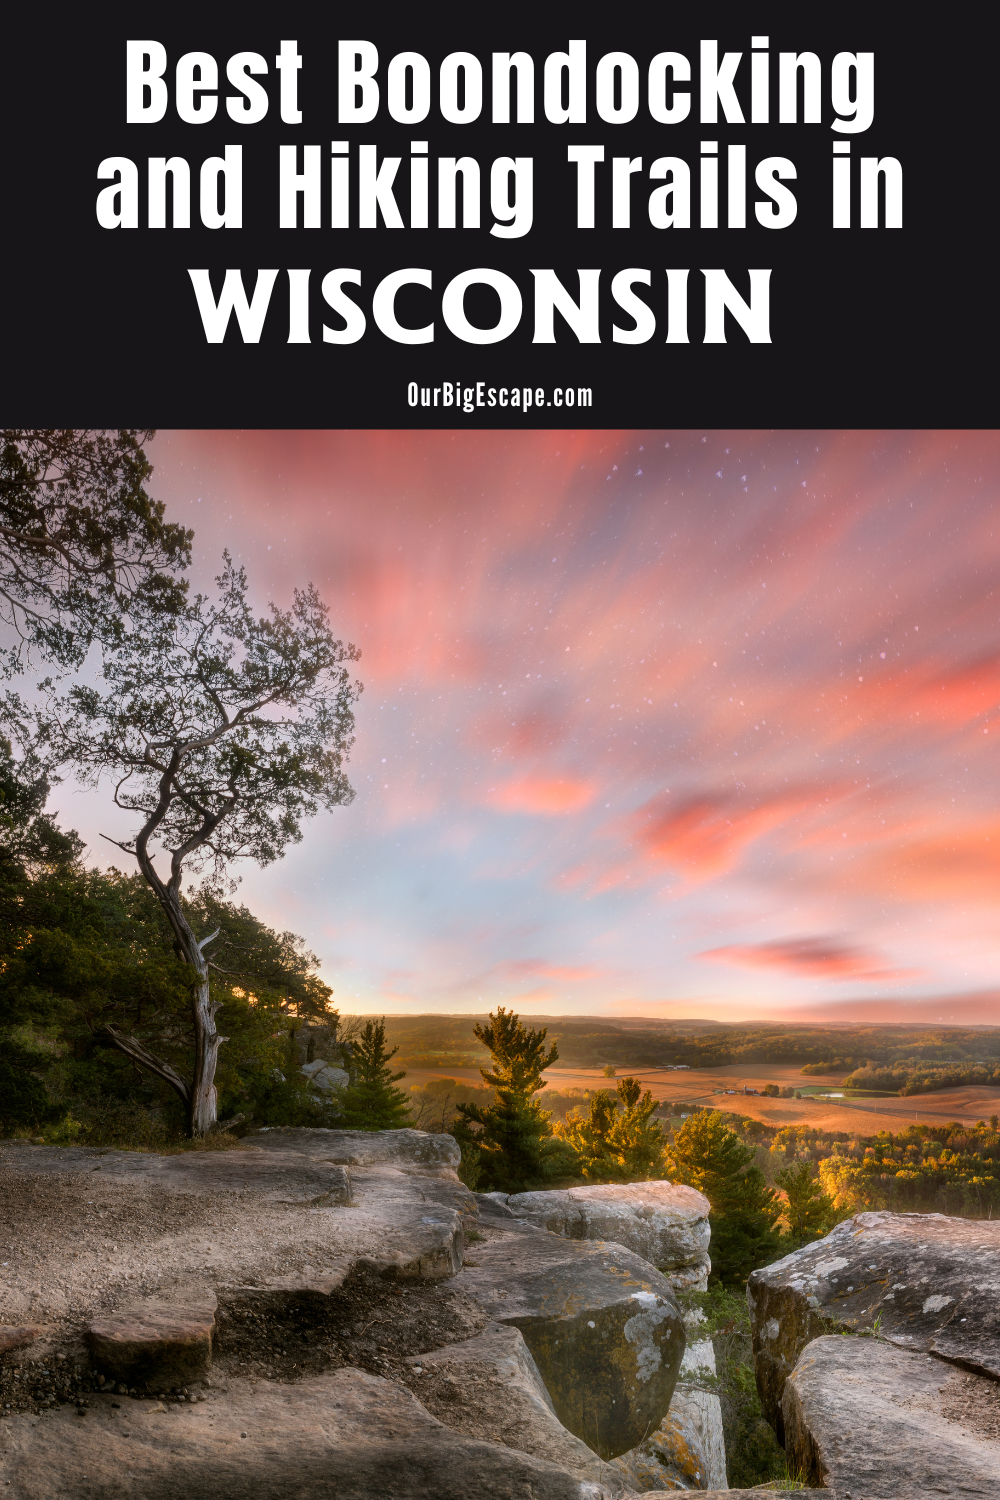 Best Boondocking and Hiking Trails in Wisconsin